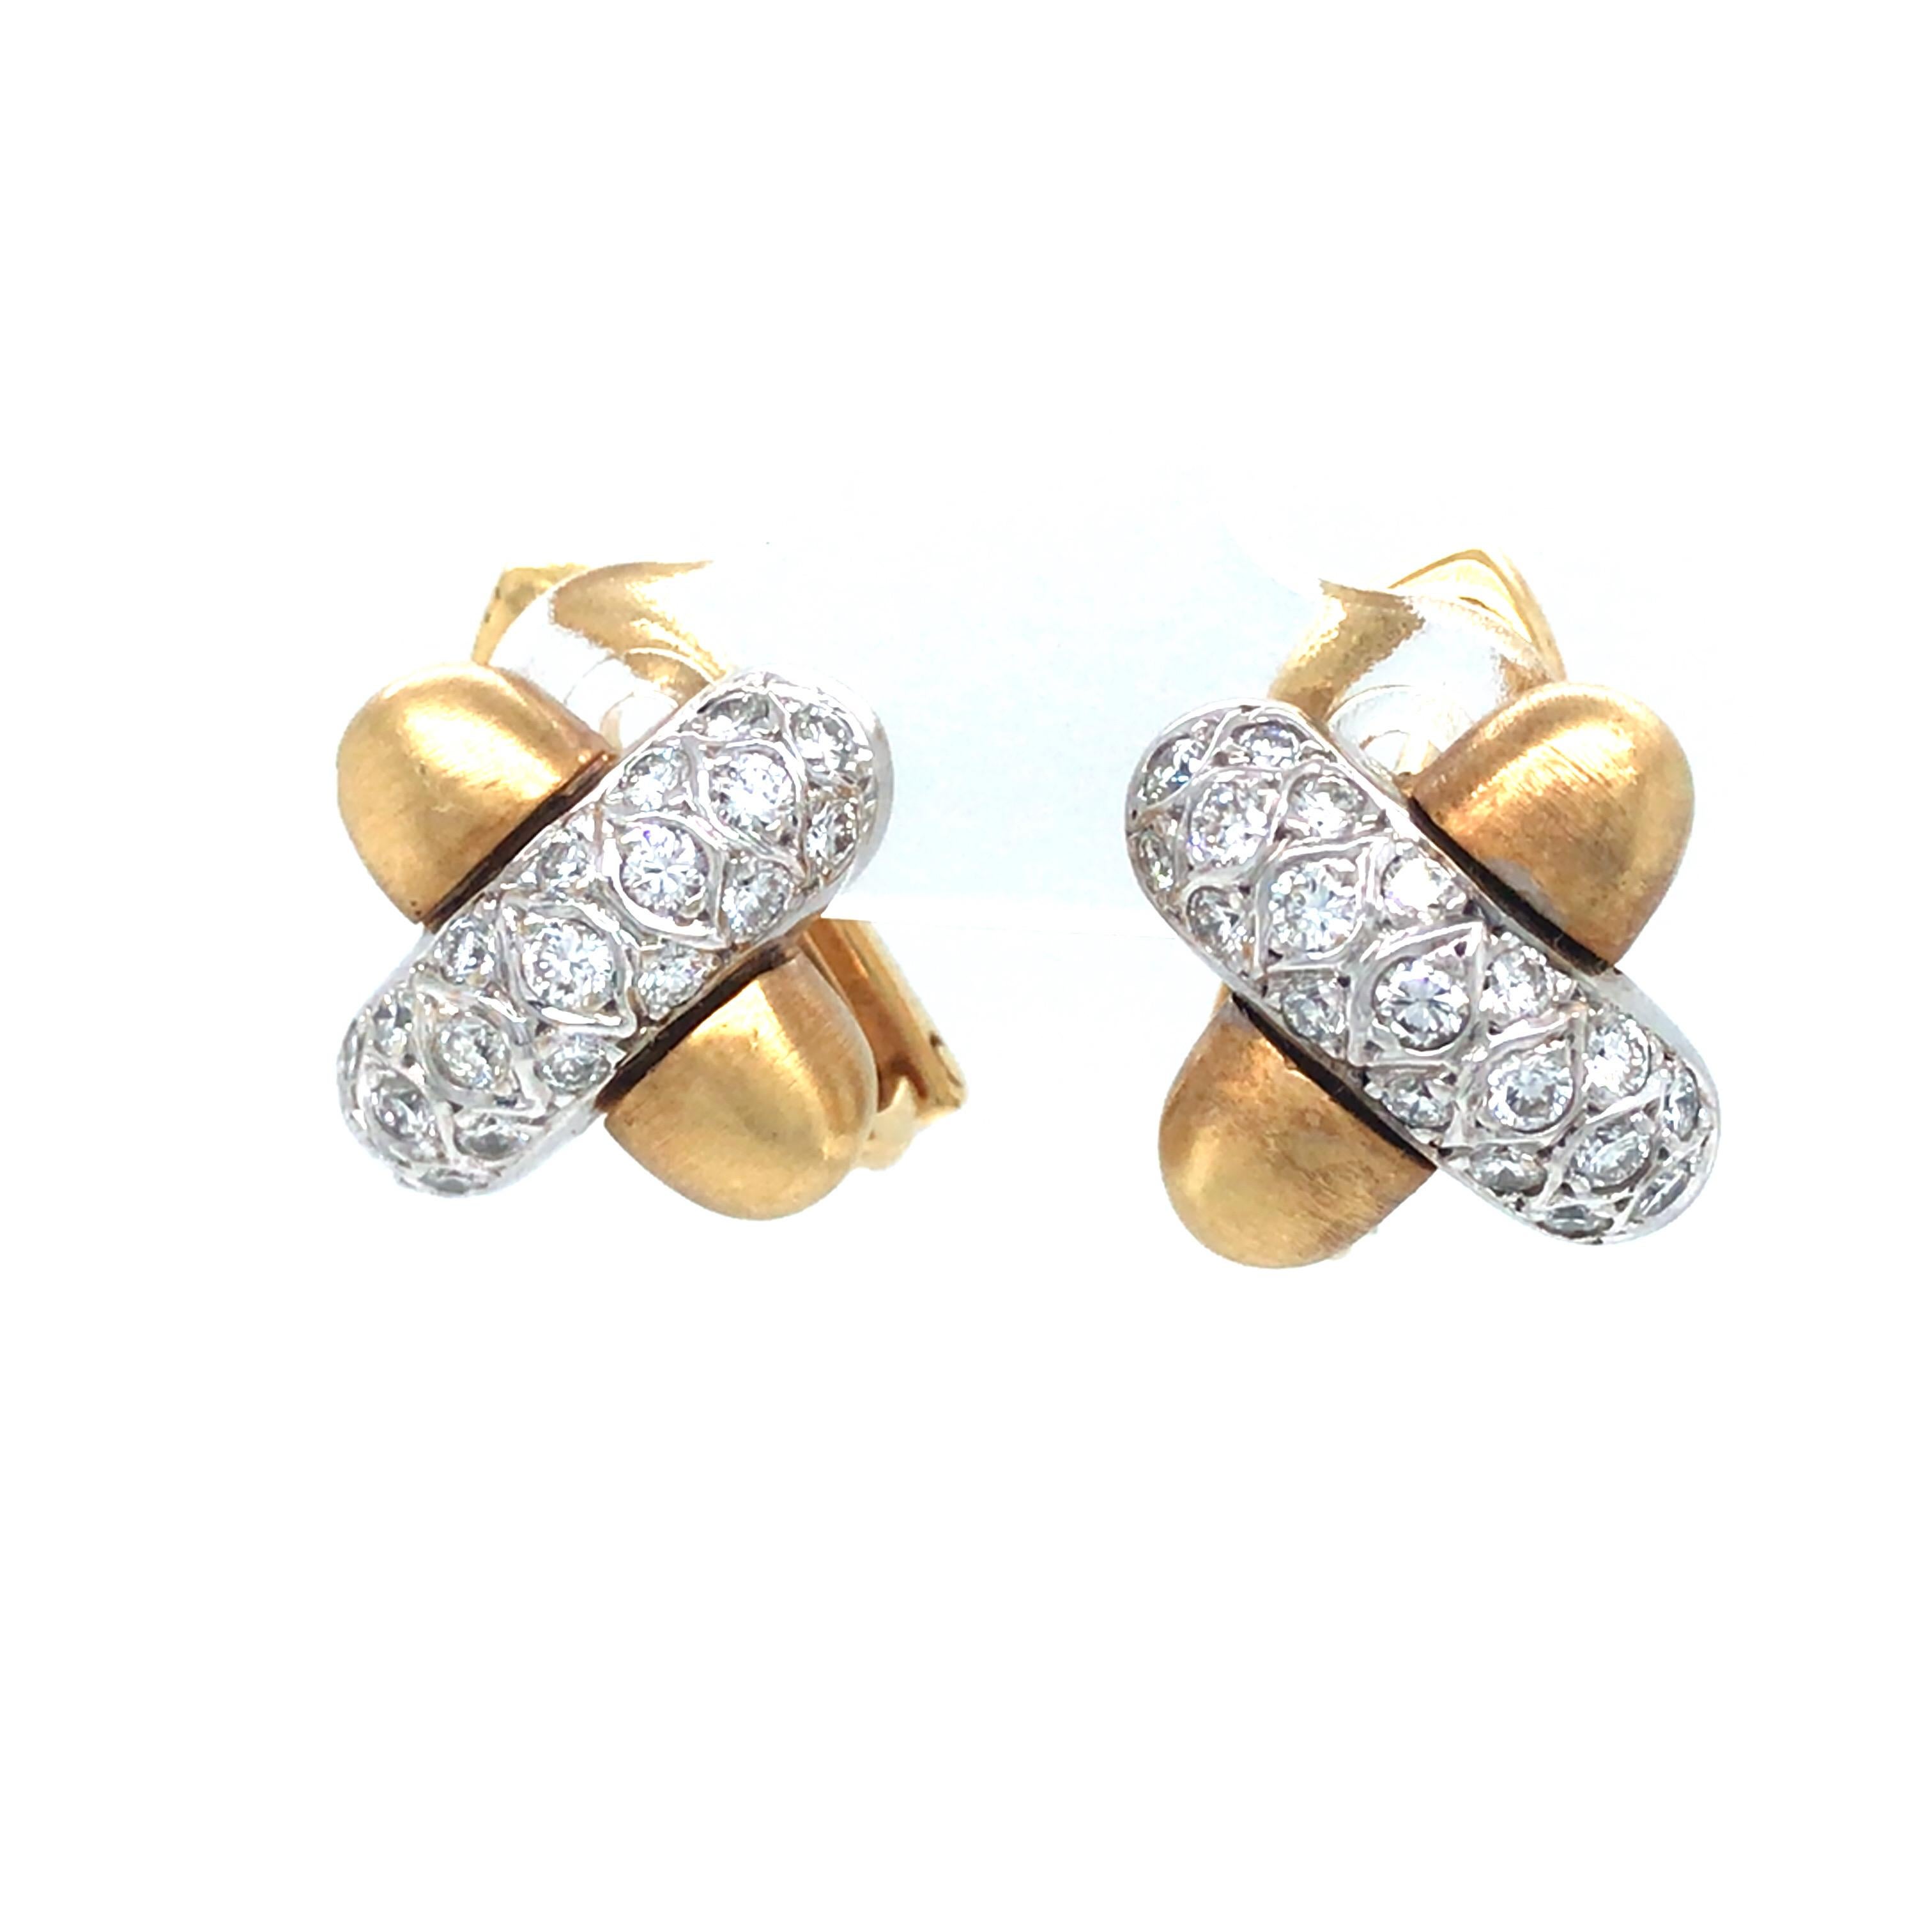 Diamond 'X' Earrings in 18K Two-Tone Gold.  Round Brilliant Cut Diamonds weighing 1.0 carat total weight, G-H in color and VS-SI in clarity are expertly set.  The Earrings measure 1/2 inch in length and width. 13.84 grams.